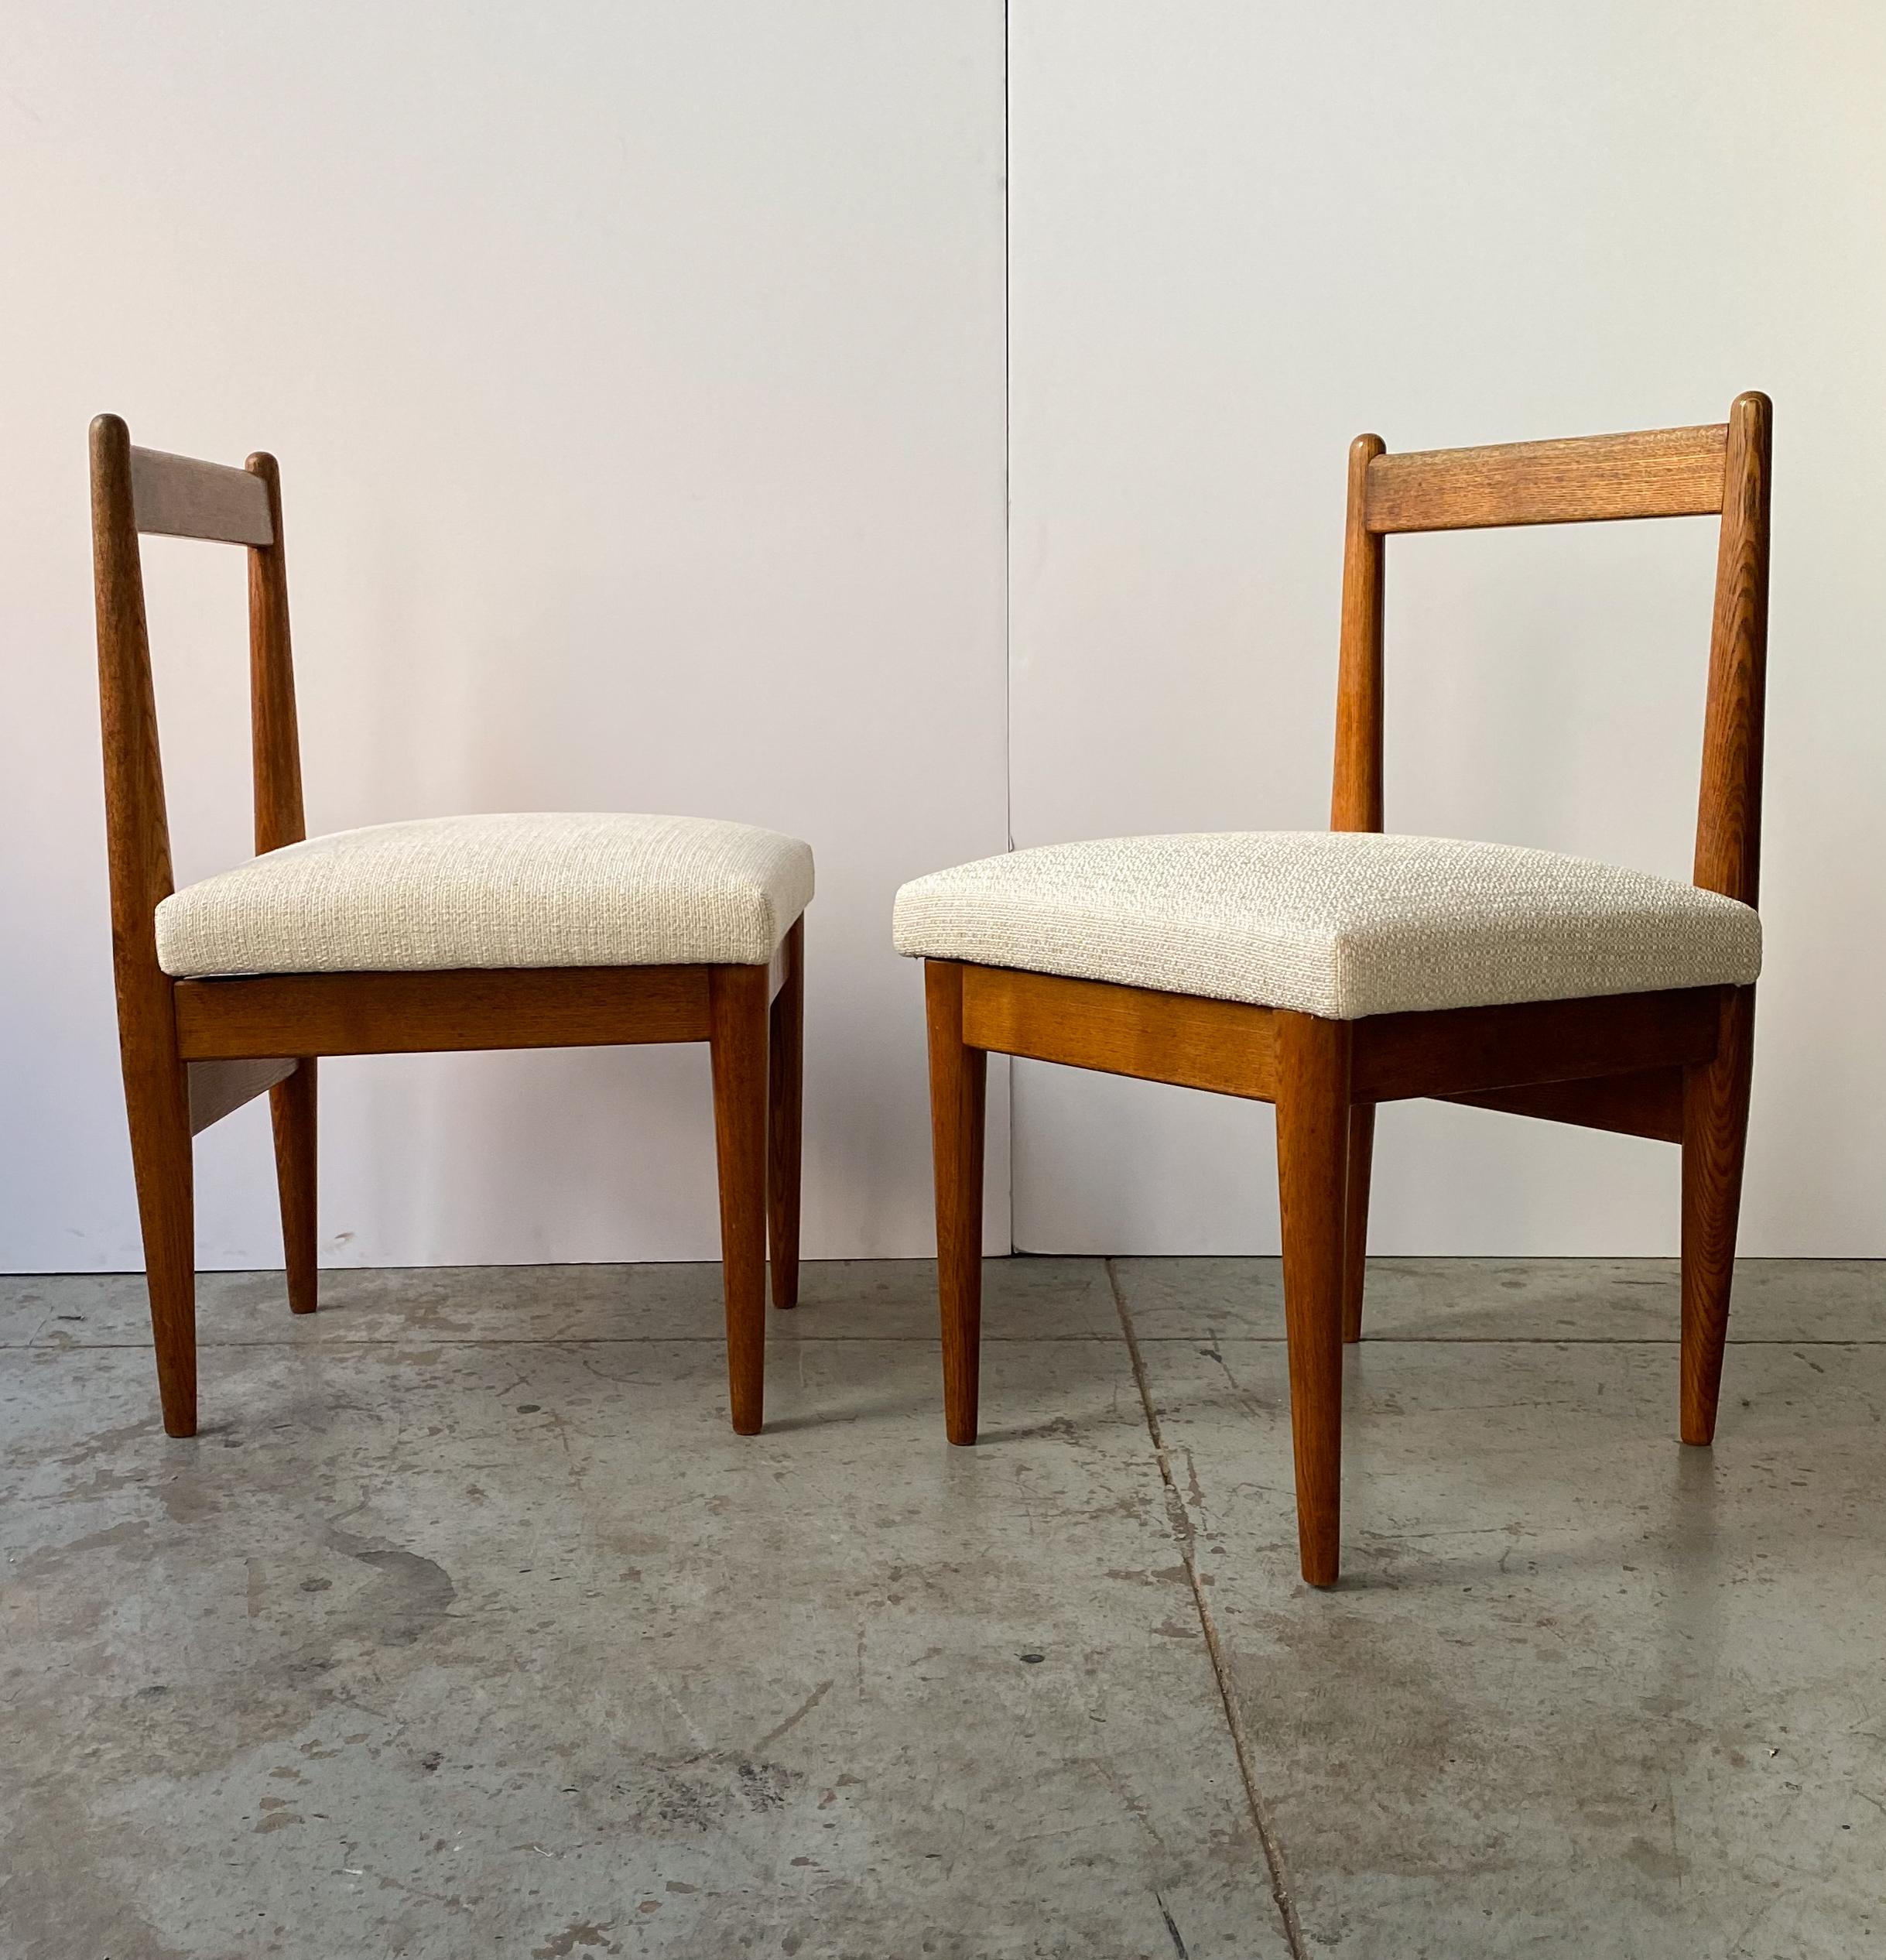 Set of four teak chairs with upholstered seats. A spare and elegant design by Japanese furniture designer Katsuo Matsumura (1923-1991), produced circa 1962 for his own residence in Yokohama (see in situ photograph below). After graduating from the